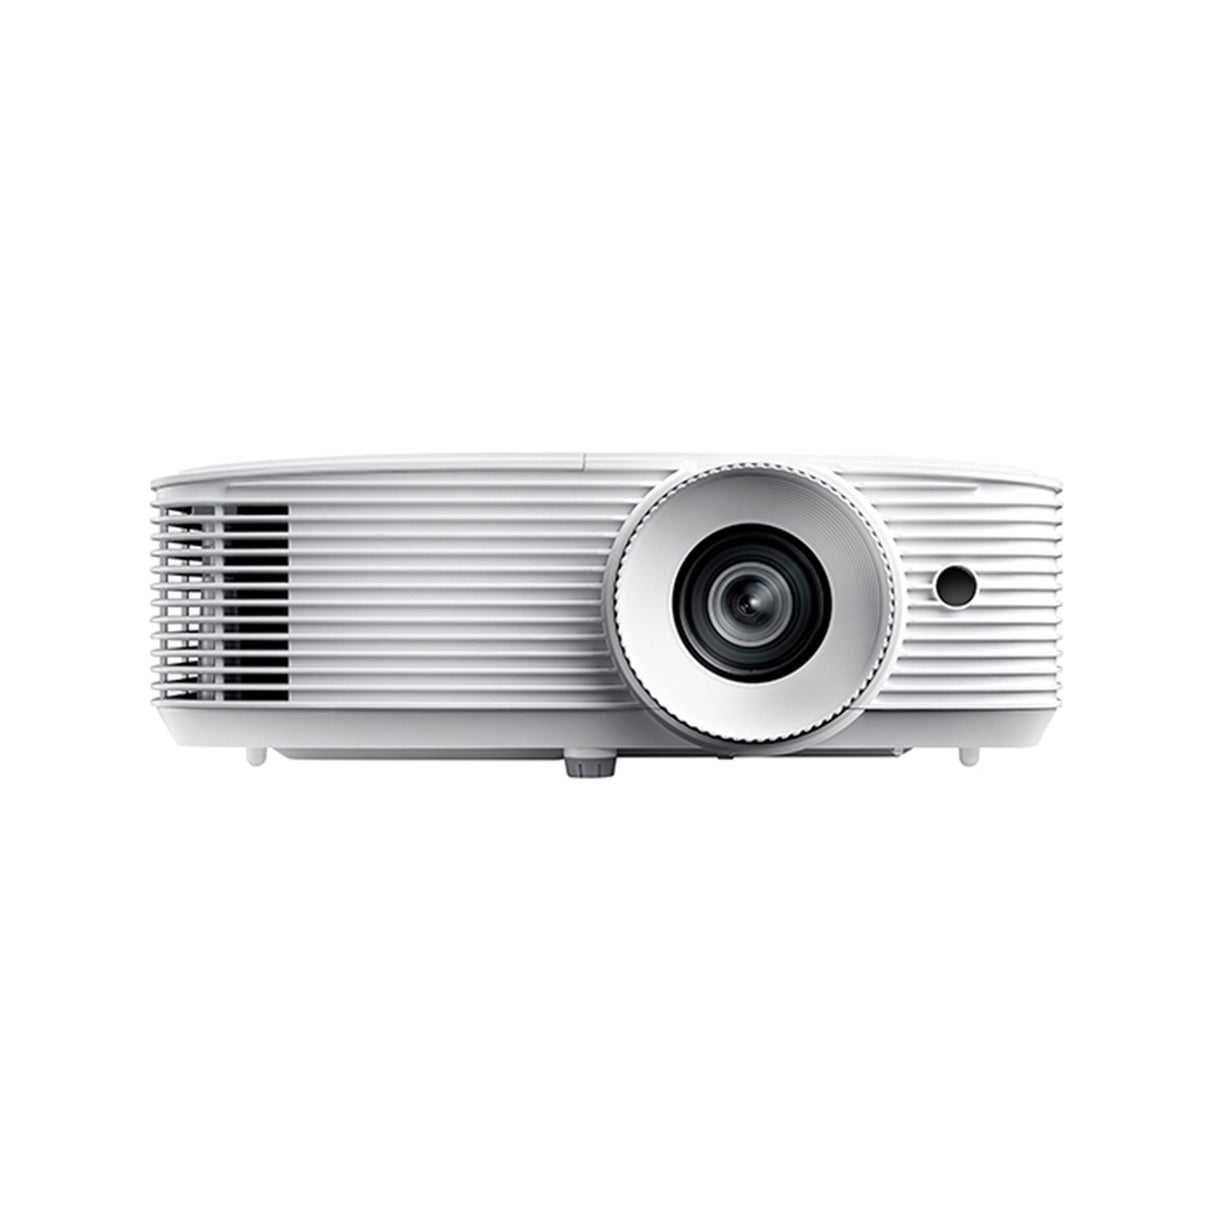 Optoma WU334 - 1080P 3D DLP Business Projector